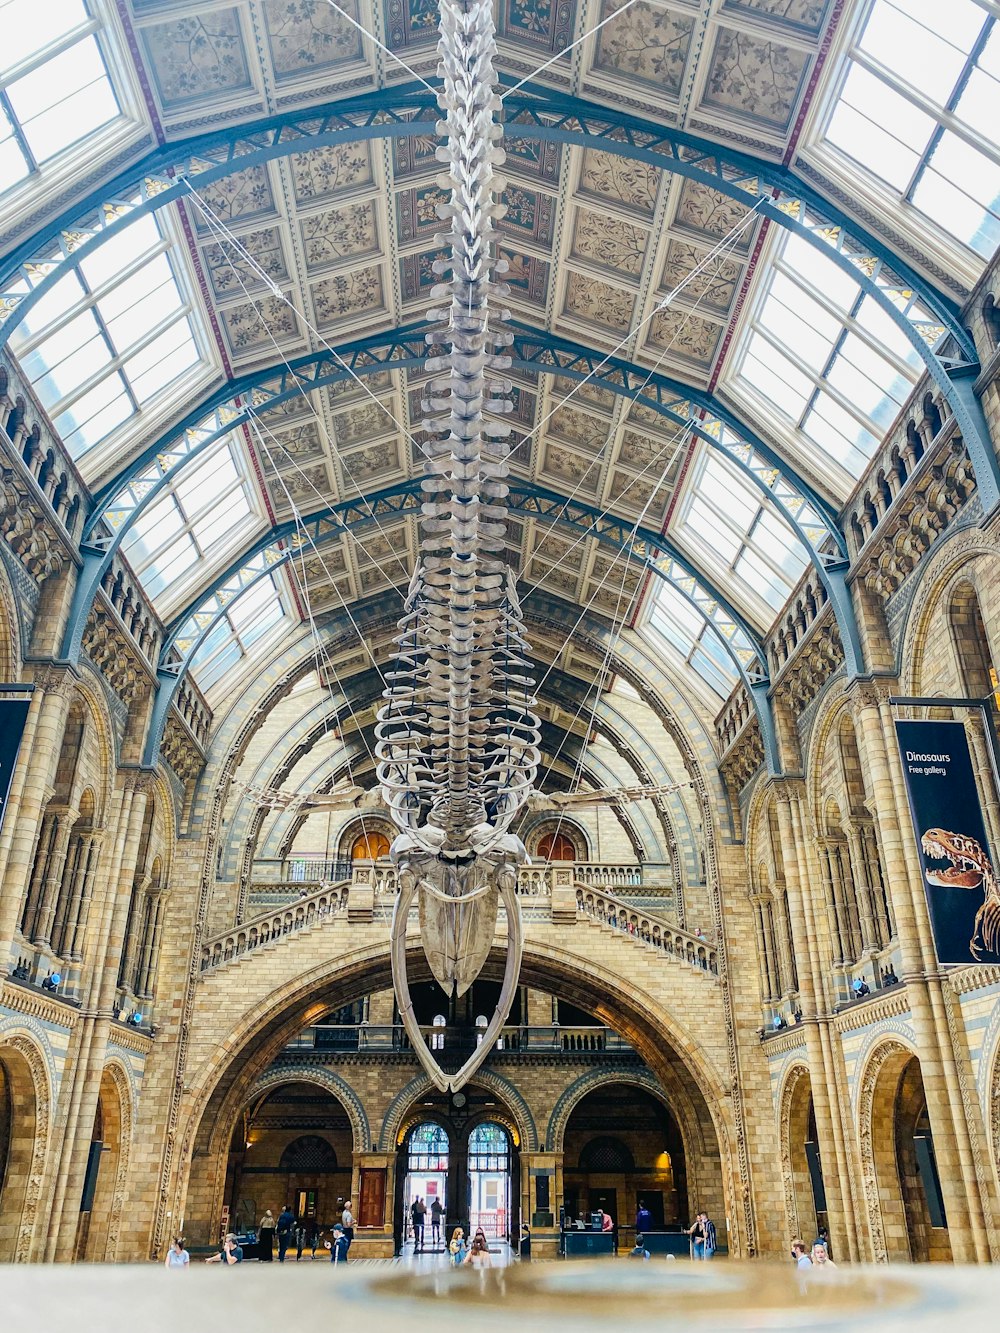 a large fish skeleton hanging from the ceiling of a building